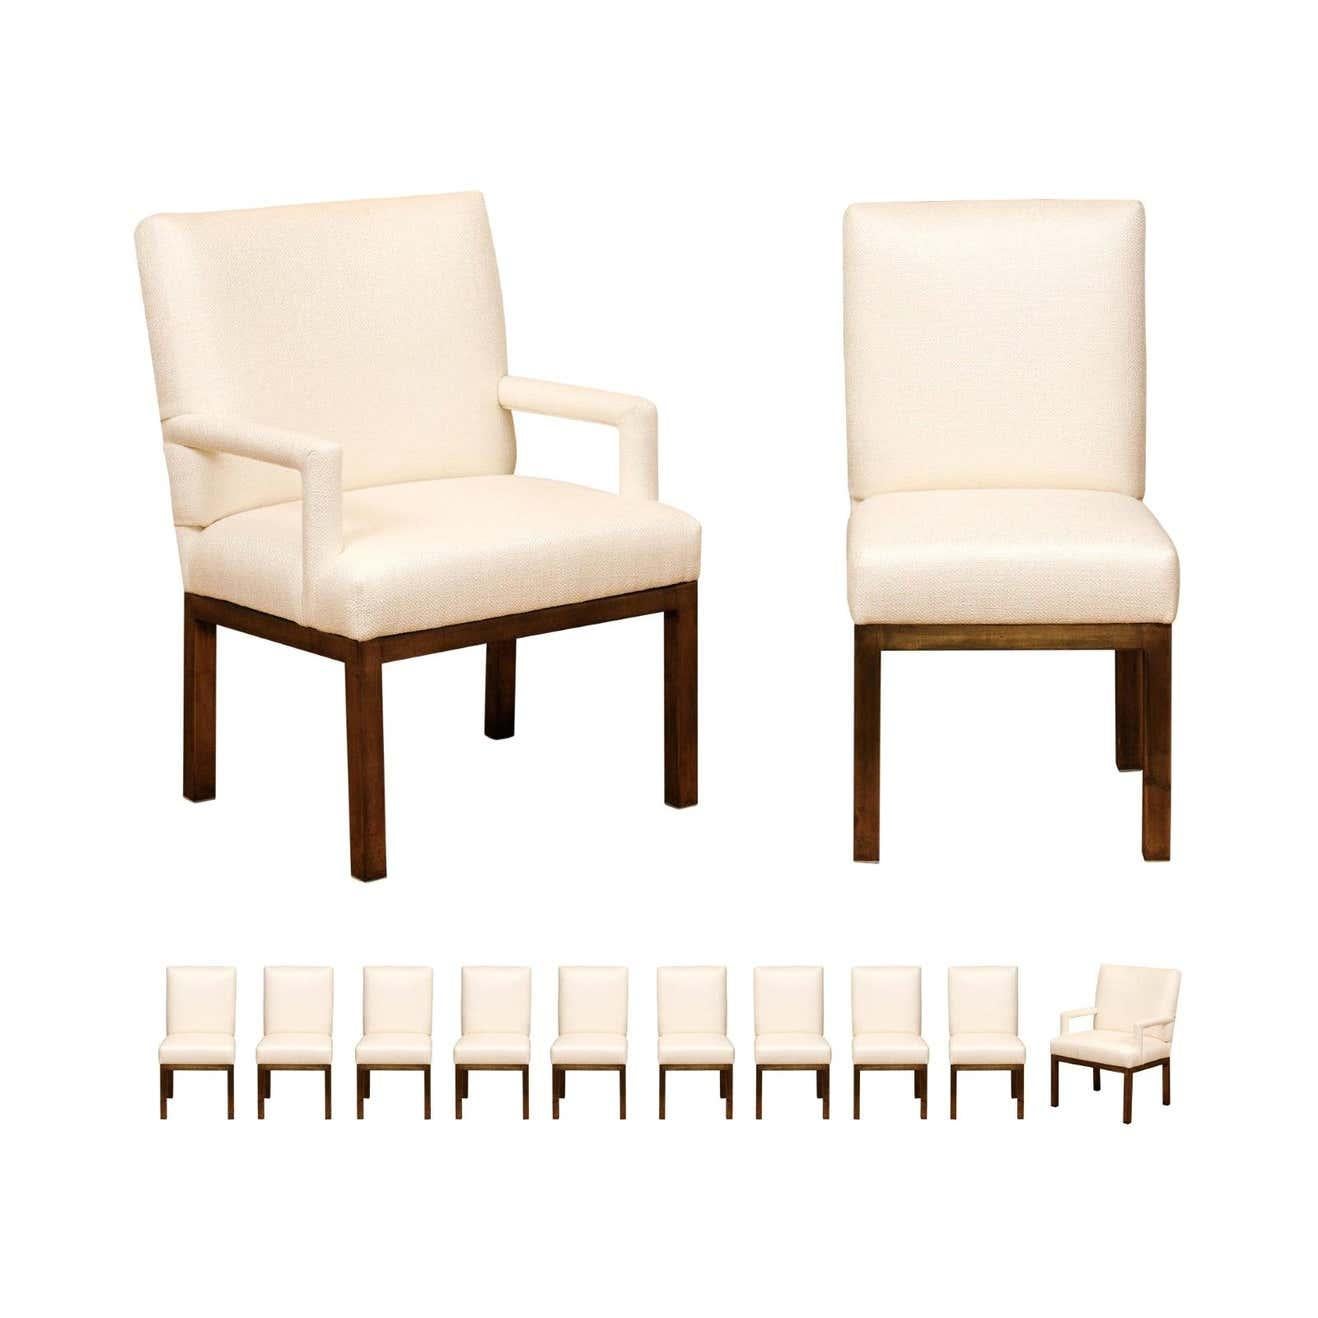 Chic Restored Set of 16 Brass Parsons Dining Chairs by John Stuart, circa 1968 For Sale